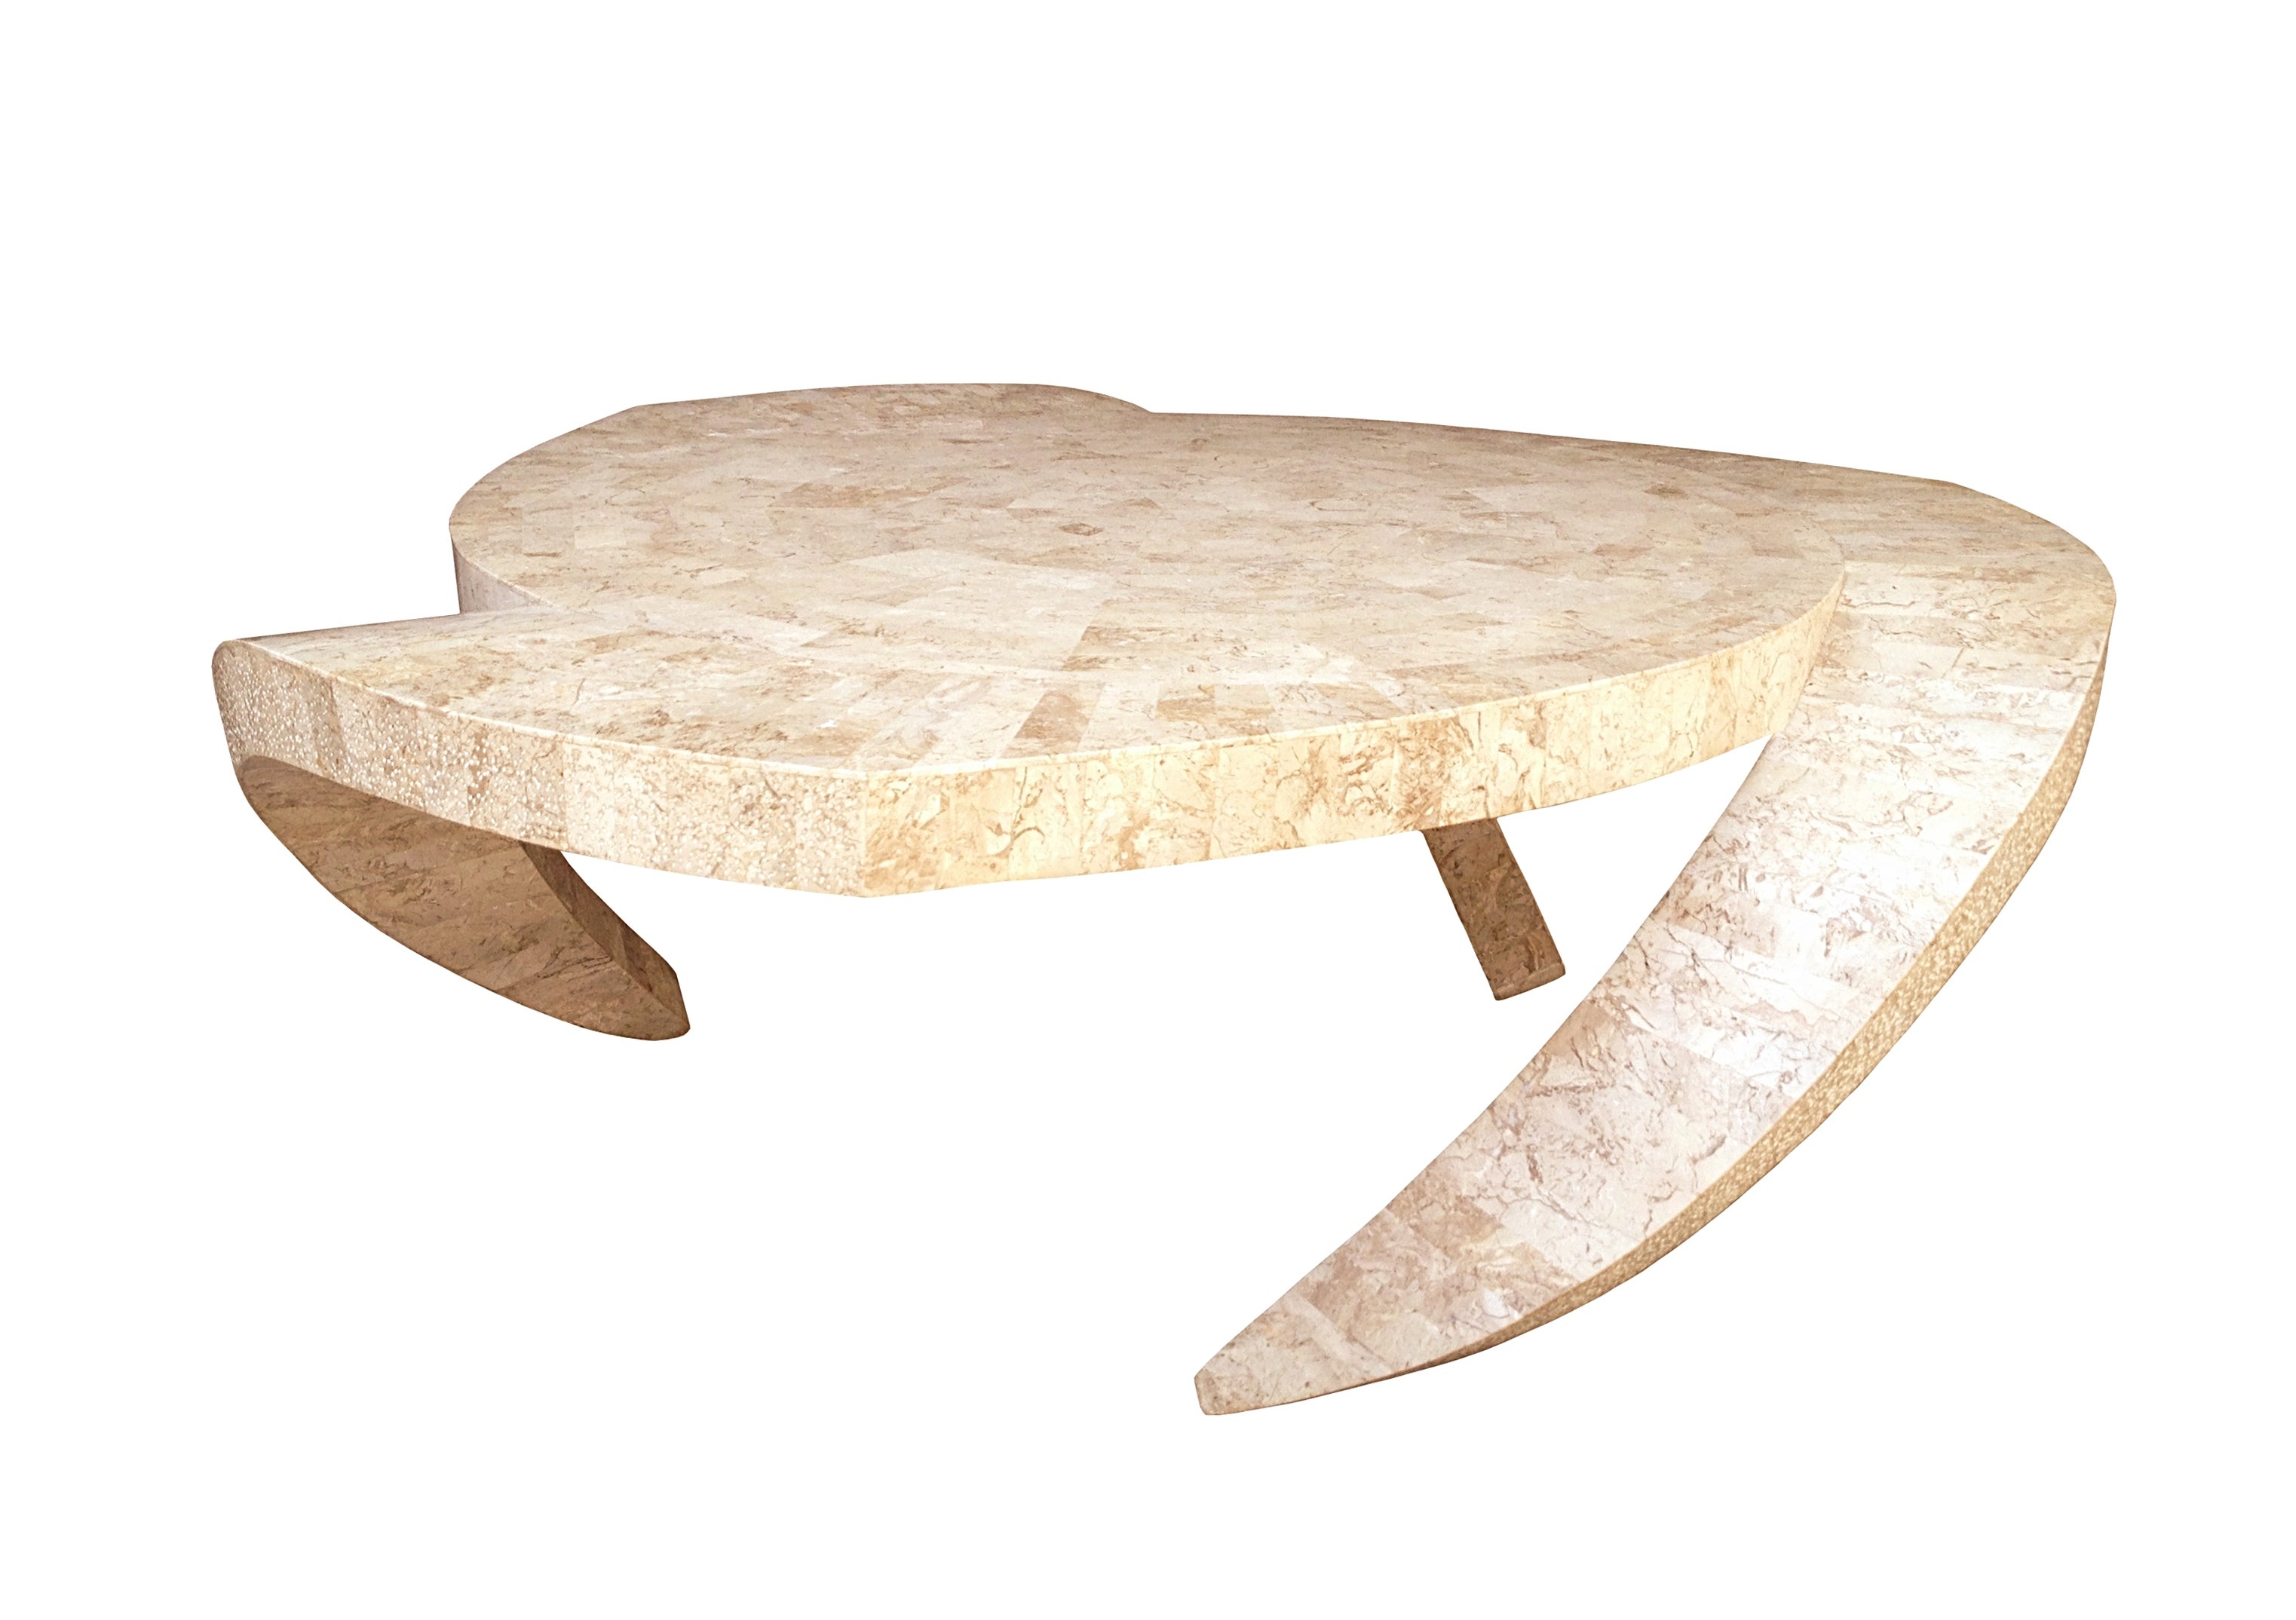 Architectural Coffee Table by Maitland Smith